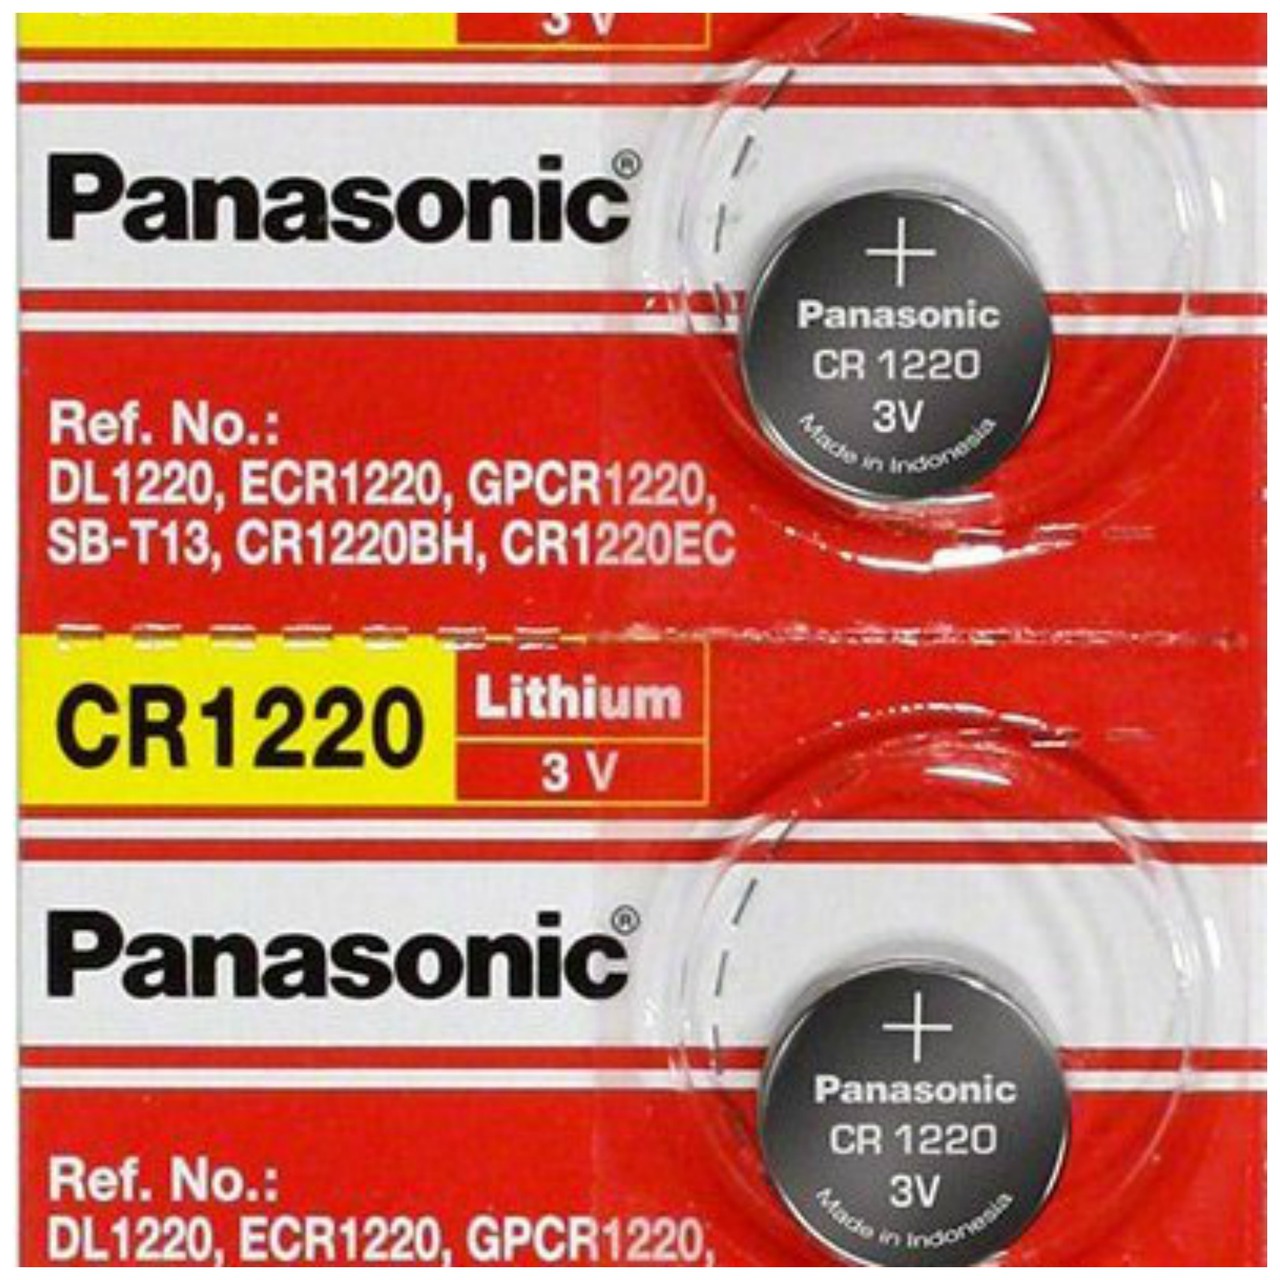 Panasonic CR1220 3V Lithium Coin Battery - 2 Pack + FREE SHIPPING!